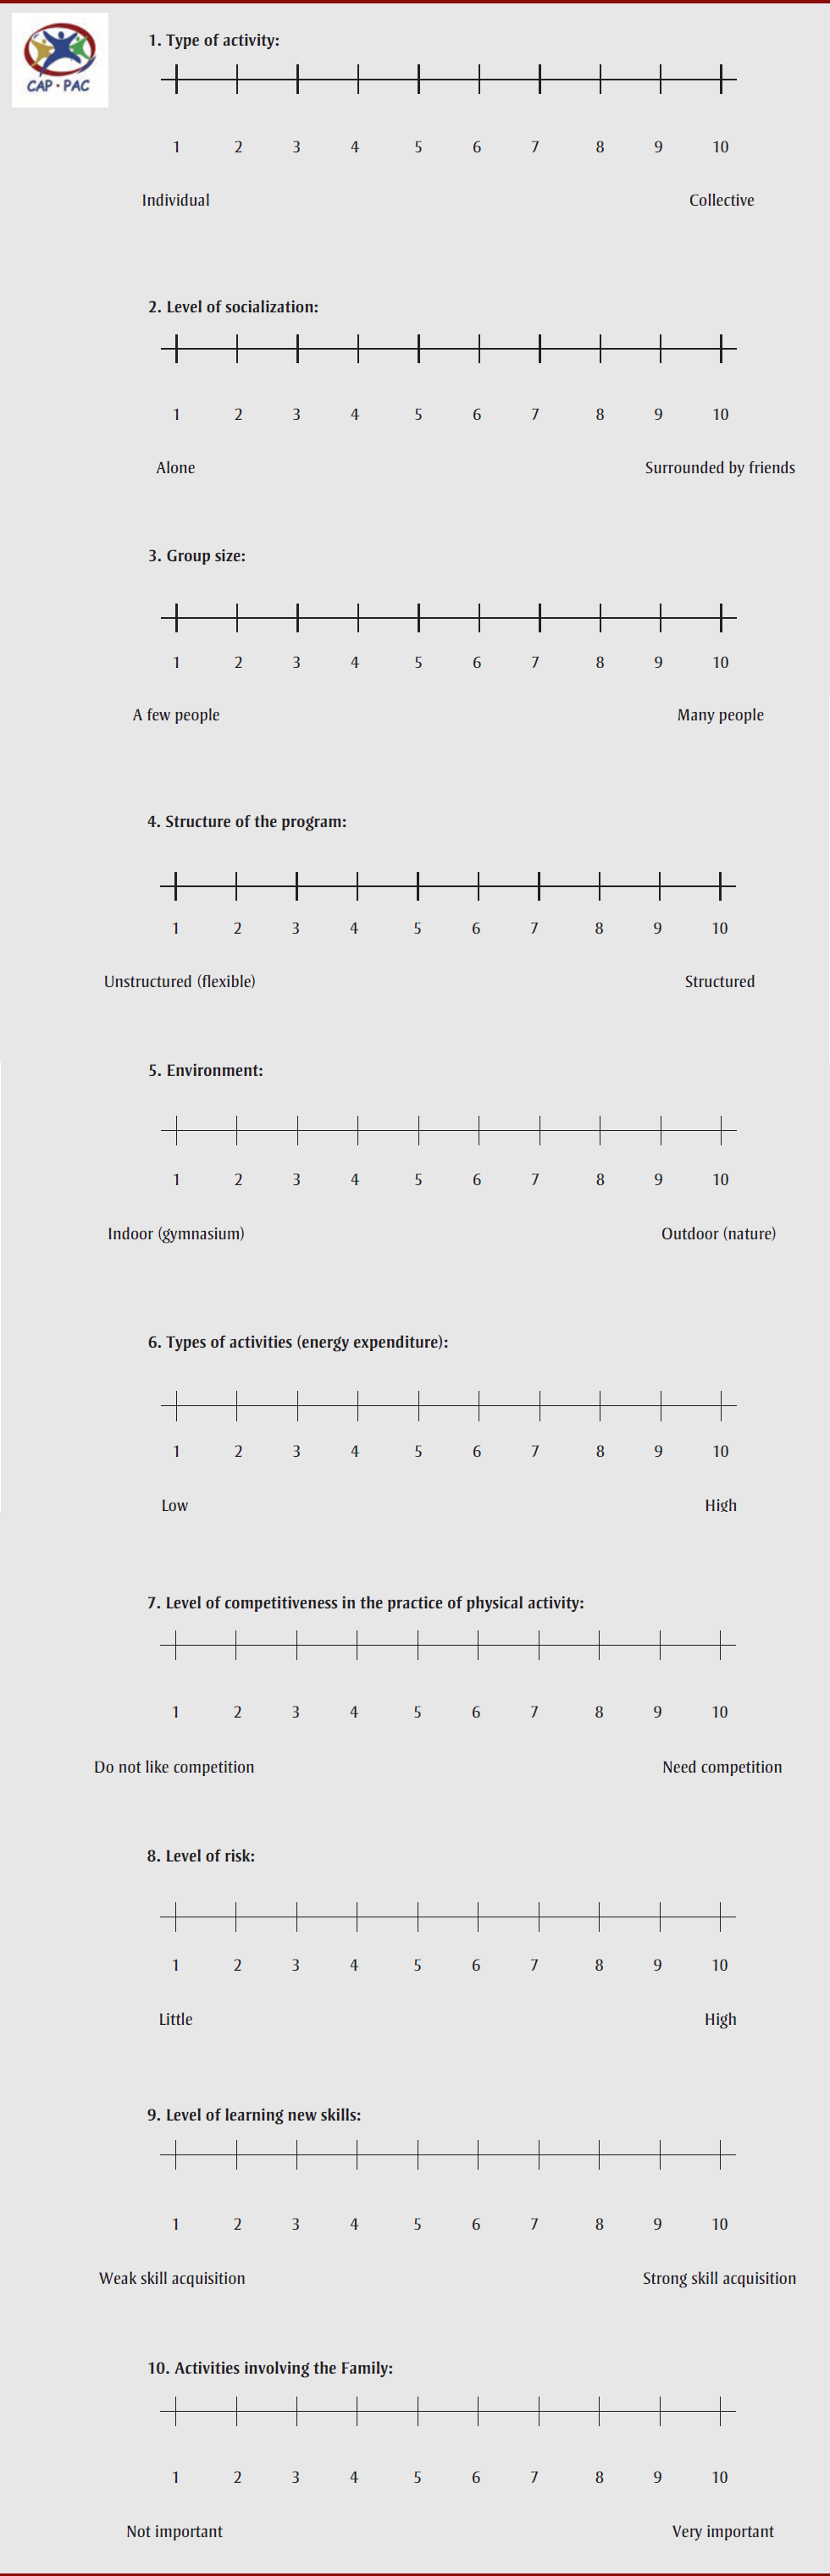 Figure 1. Preference scales